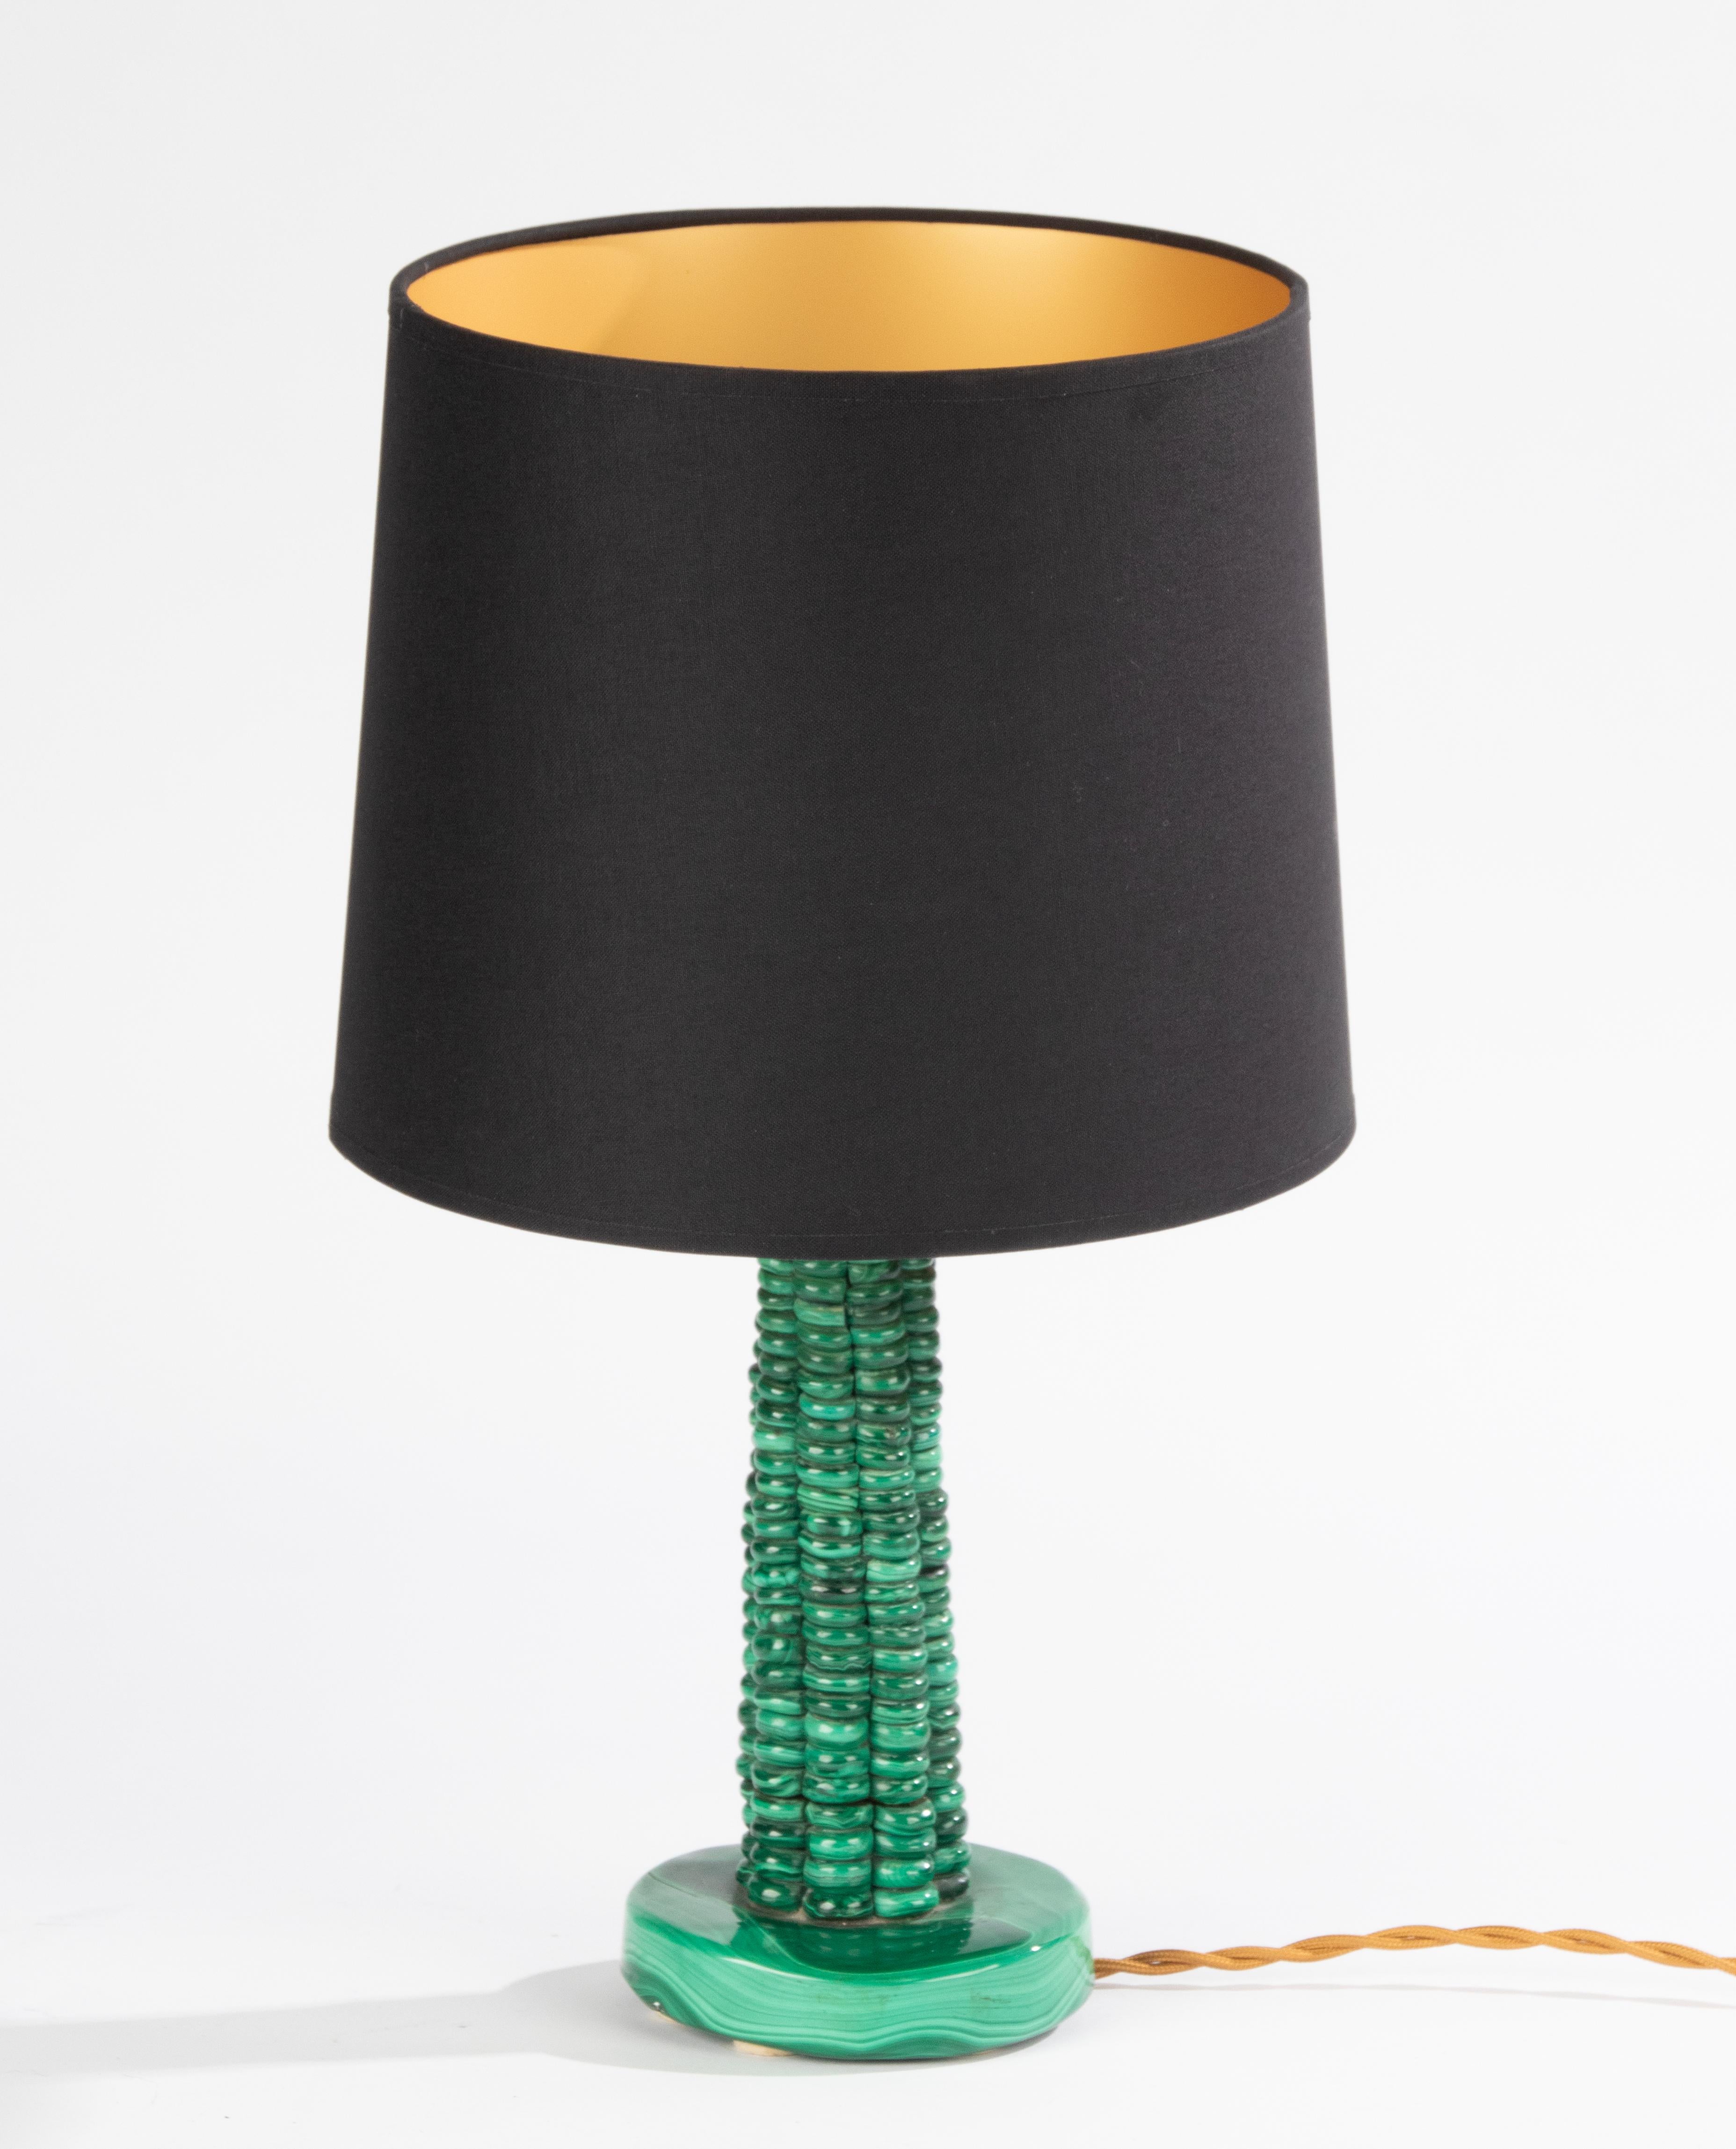 A lovely mid century modern table lamp, made of malachite stone. 
Estimated date and origin: Italy, circa 1960-1970. 
The lamp is in good and working condition. 
Elegant lamp shade included. 

Dimensions: 38 cm tall and Ø23 cm 
Dimensions of the